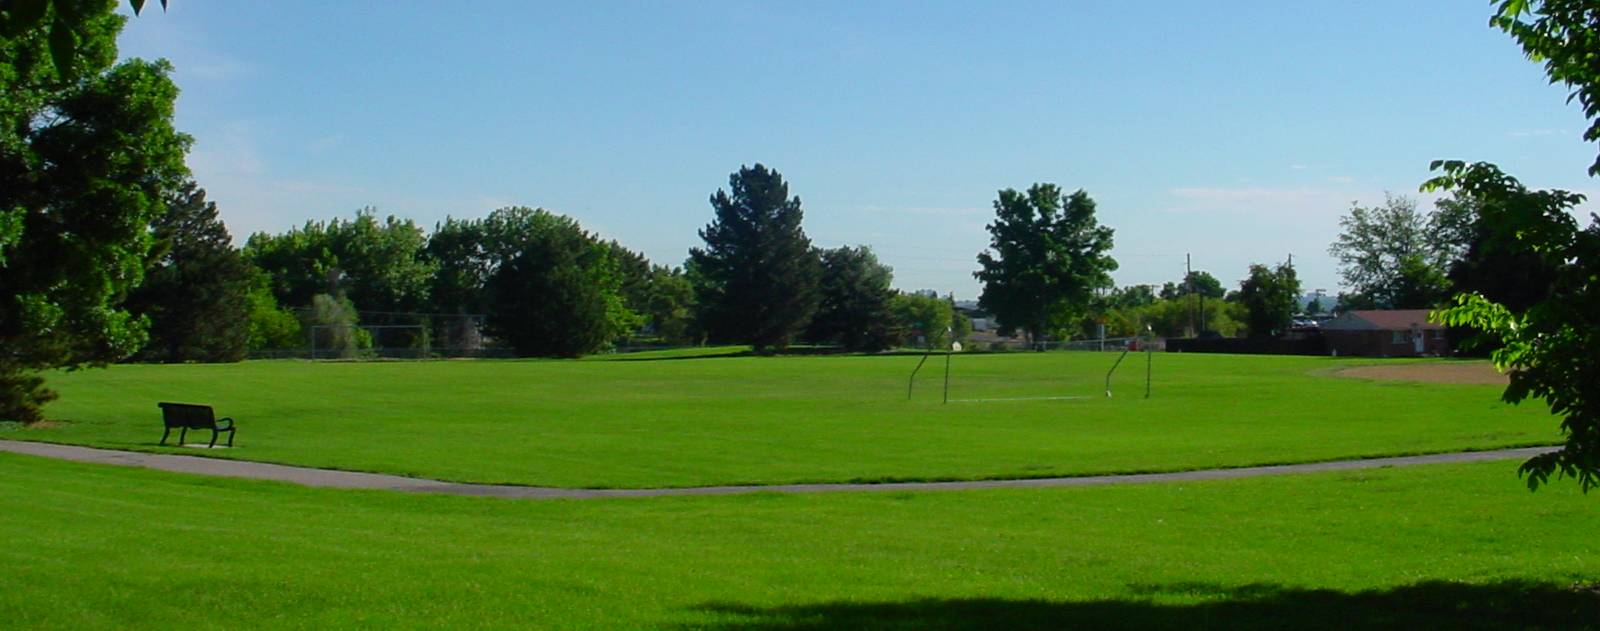 Picture of Alice Terry Park looking southwest.